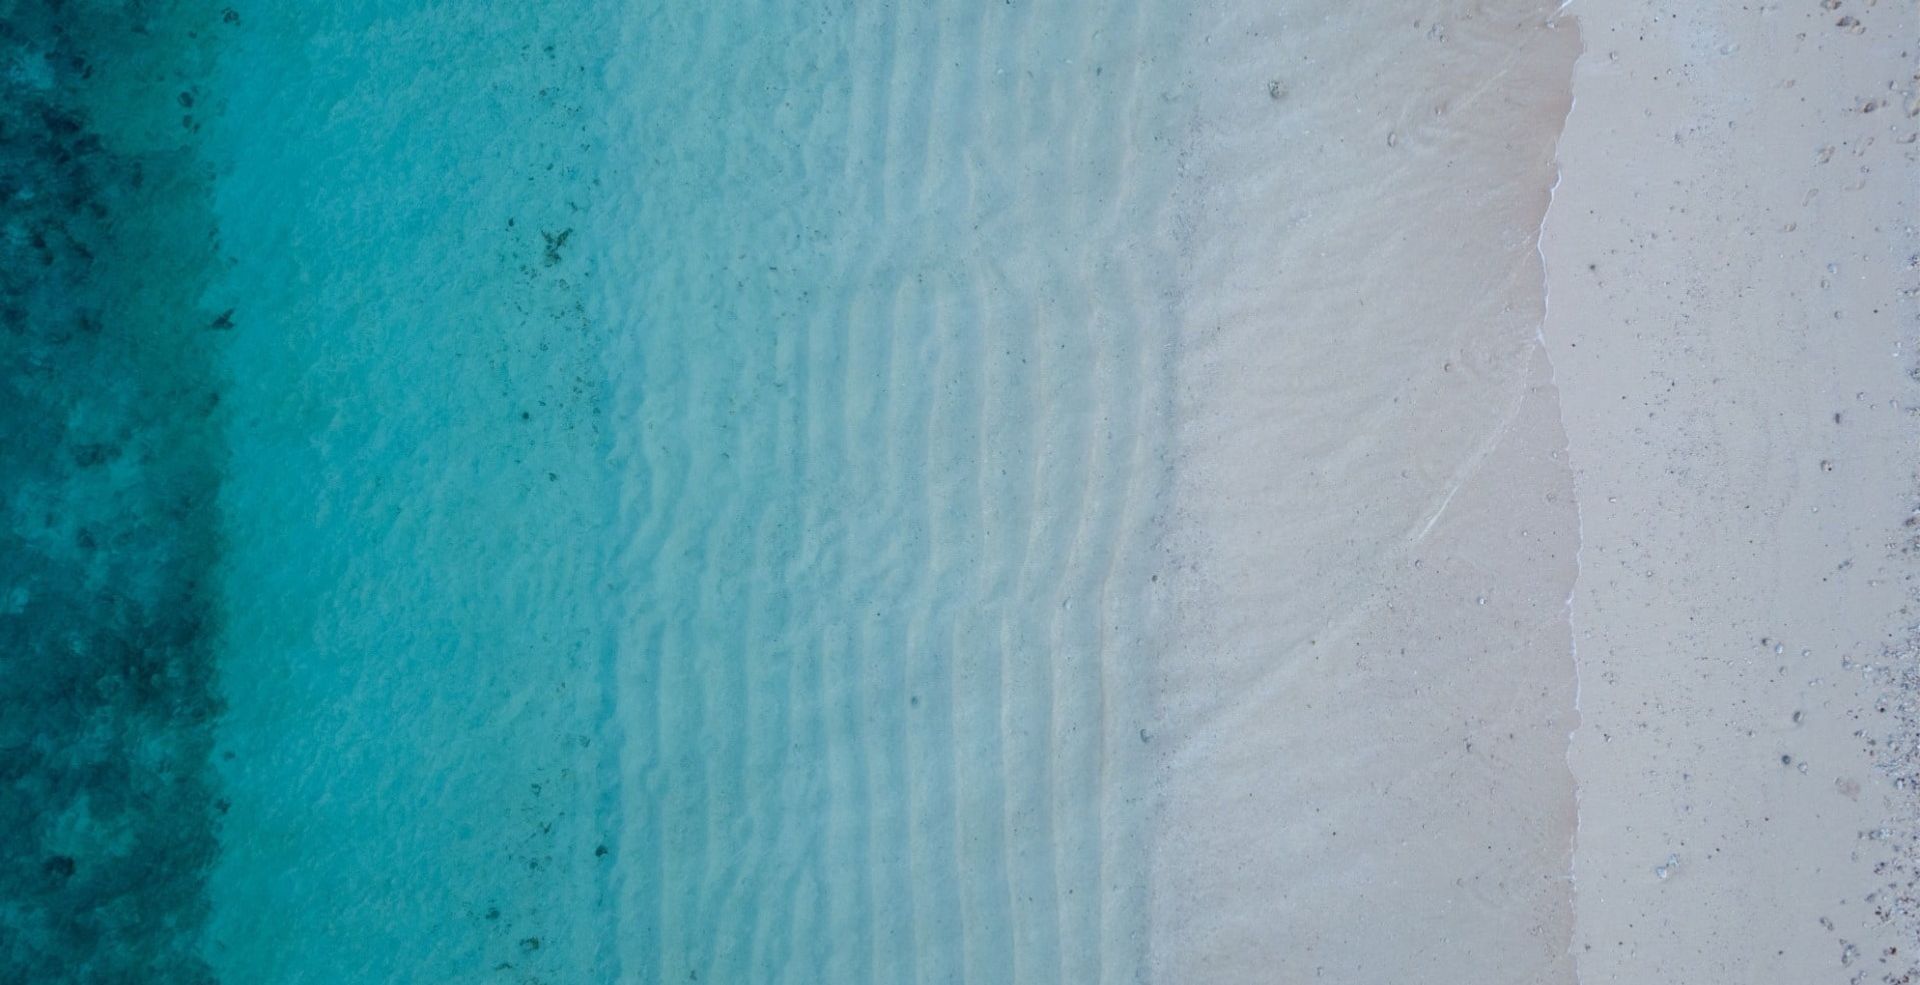 bird's eye view of gradient turquoise waves with beach